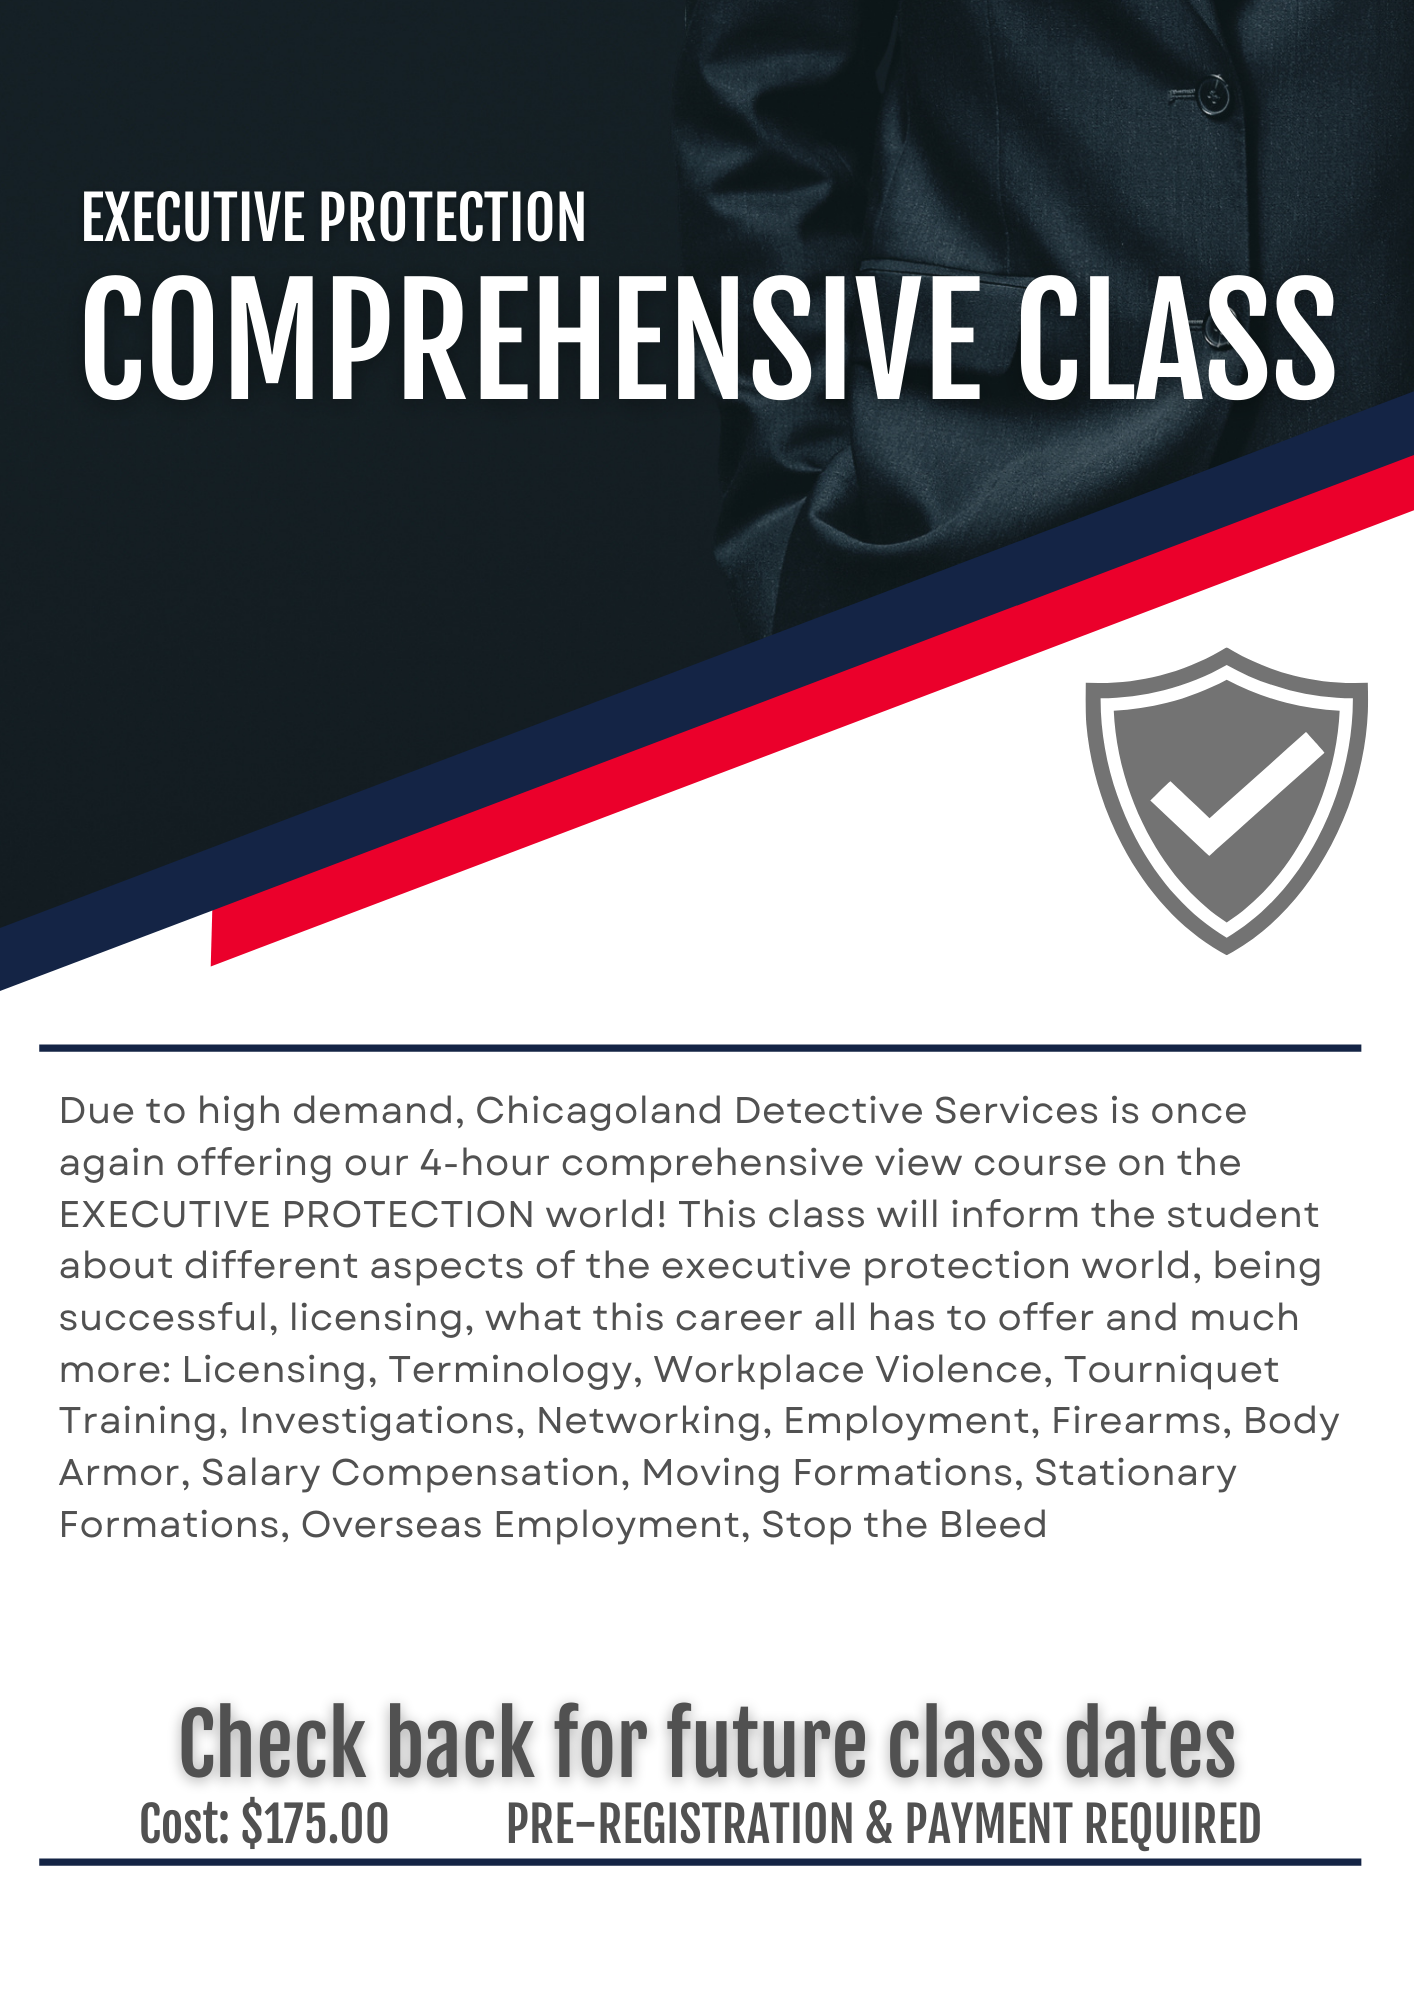 an advertisement for executive protection comprehensive class